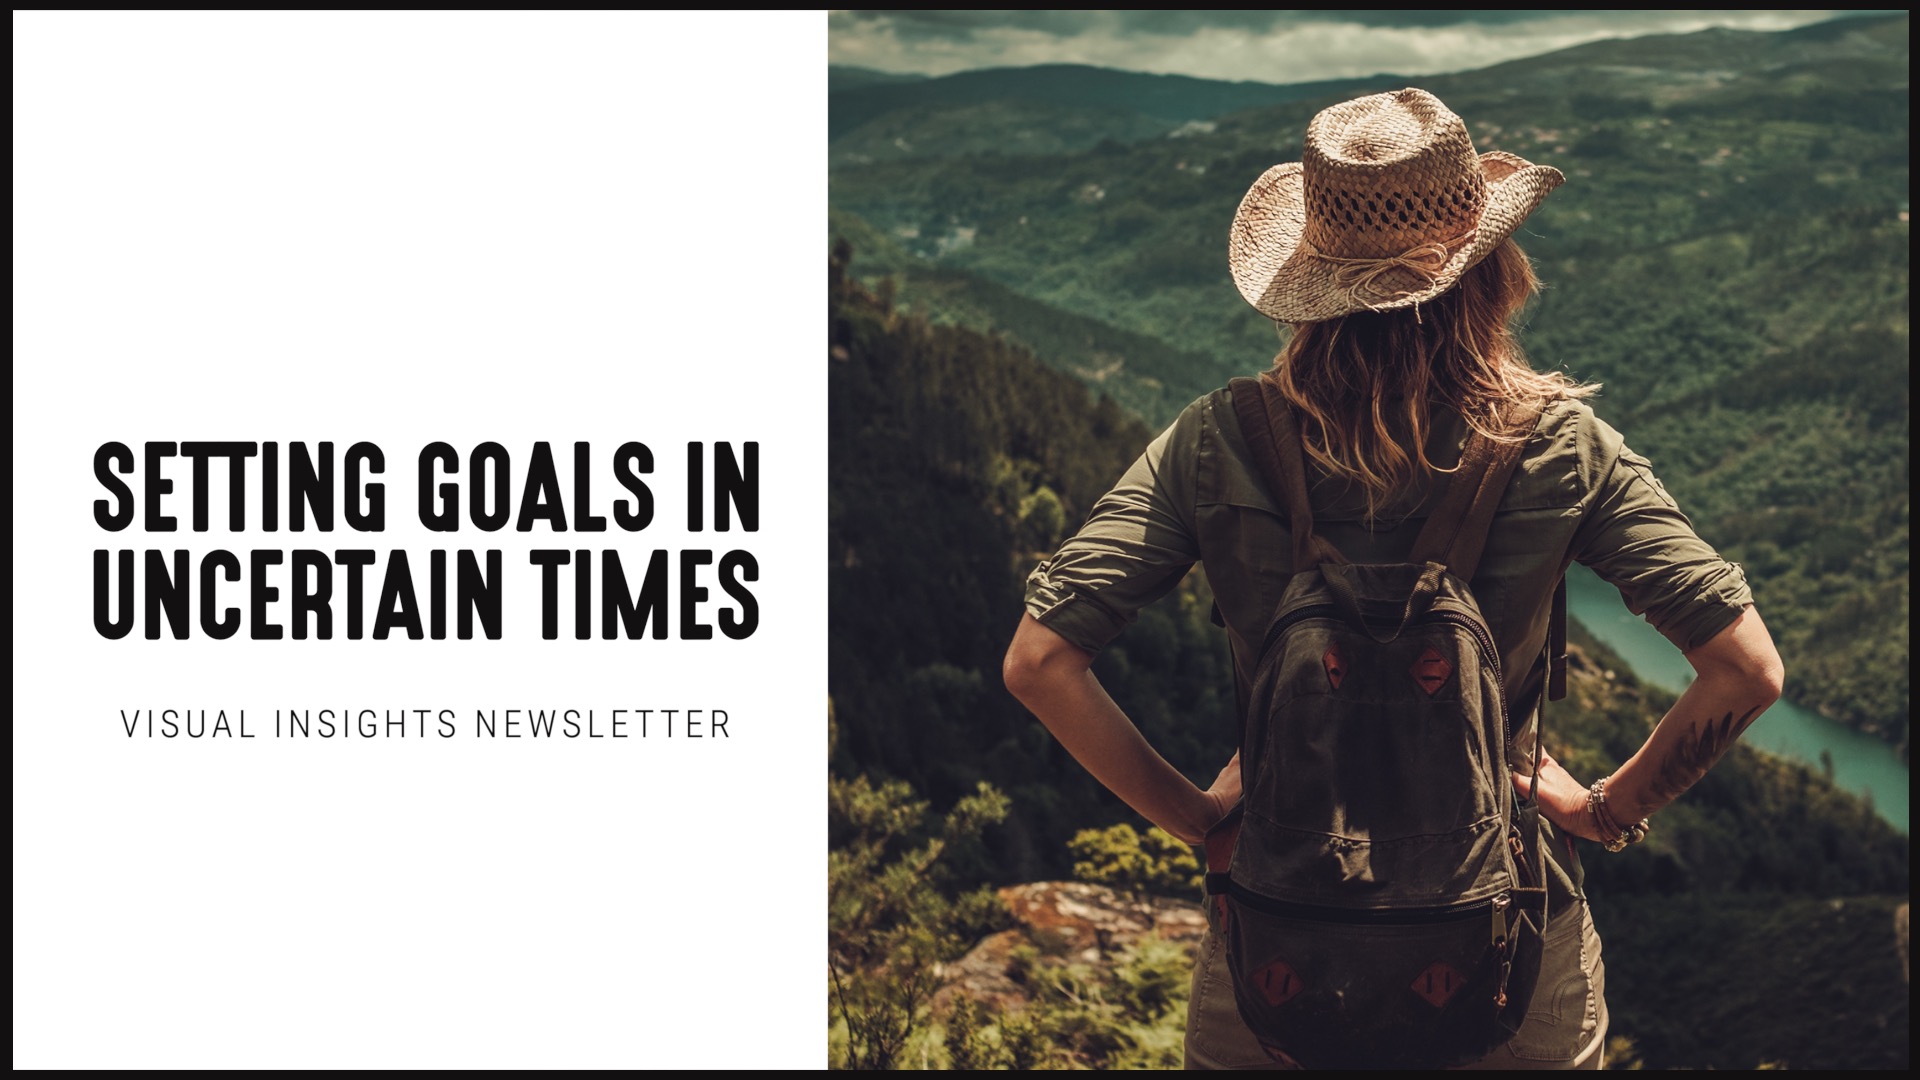 [NEW] Visual Insights Newsletter | Setting Goals in Uncertain Times